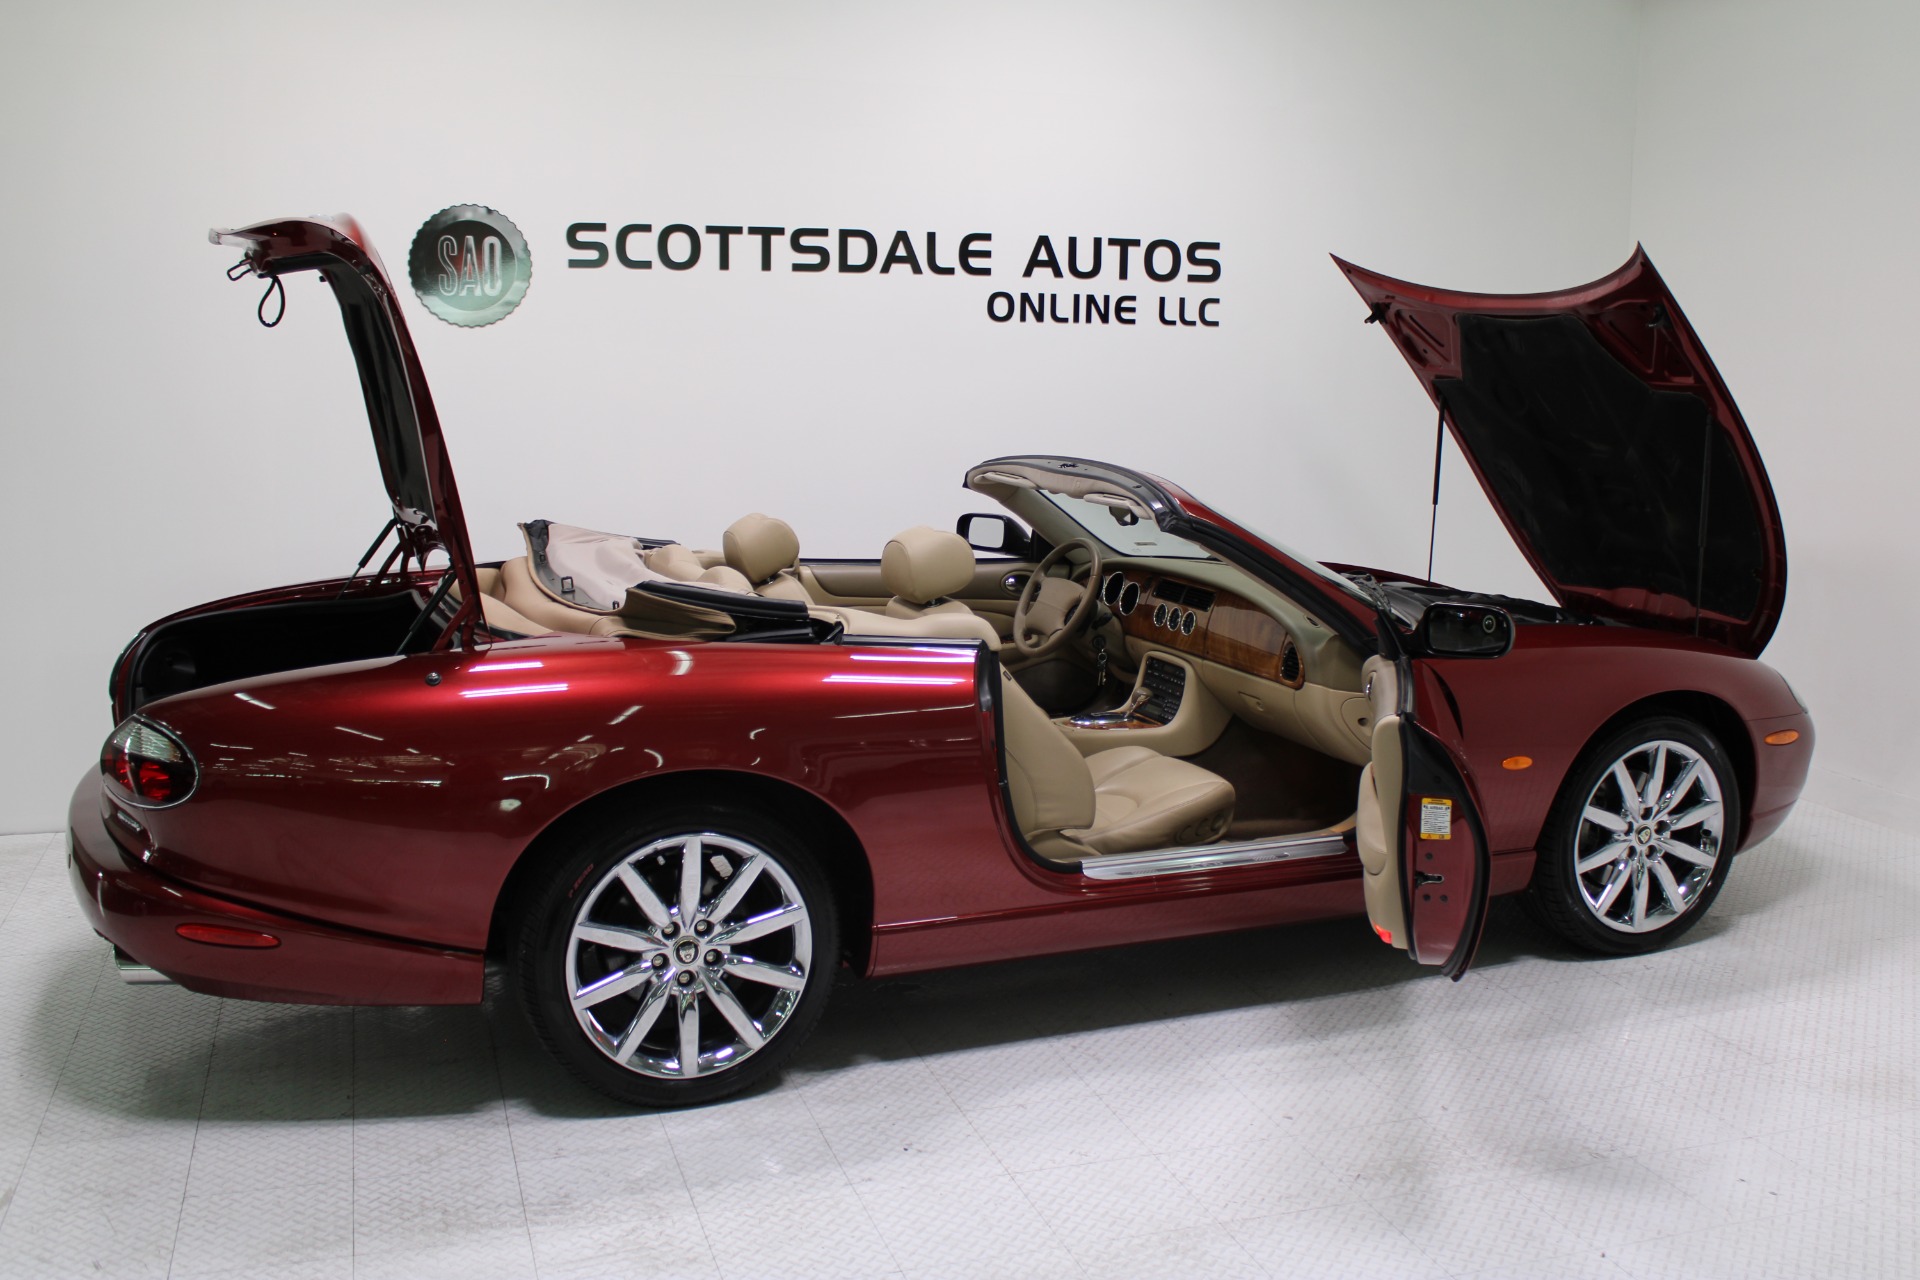 Used-2006-Jaguar-XK8-Victory-Edition-Convertible-Range-Rover